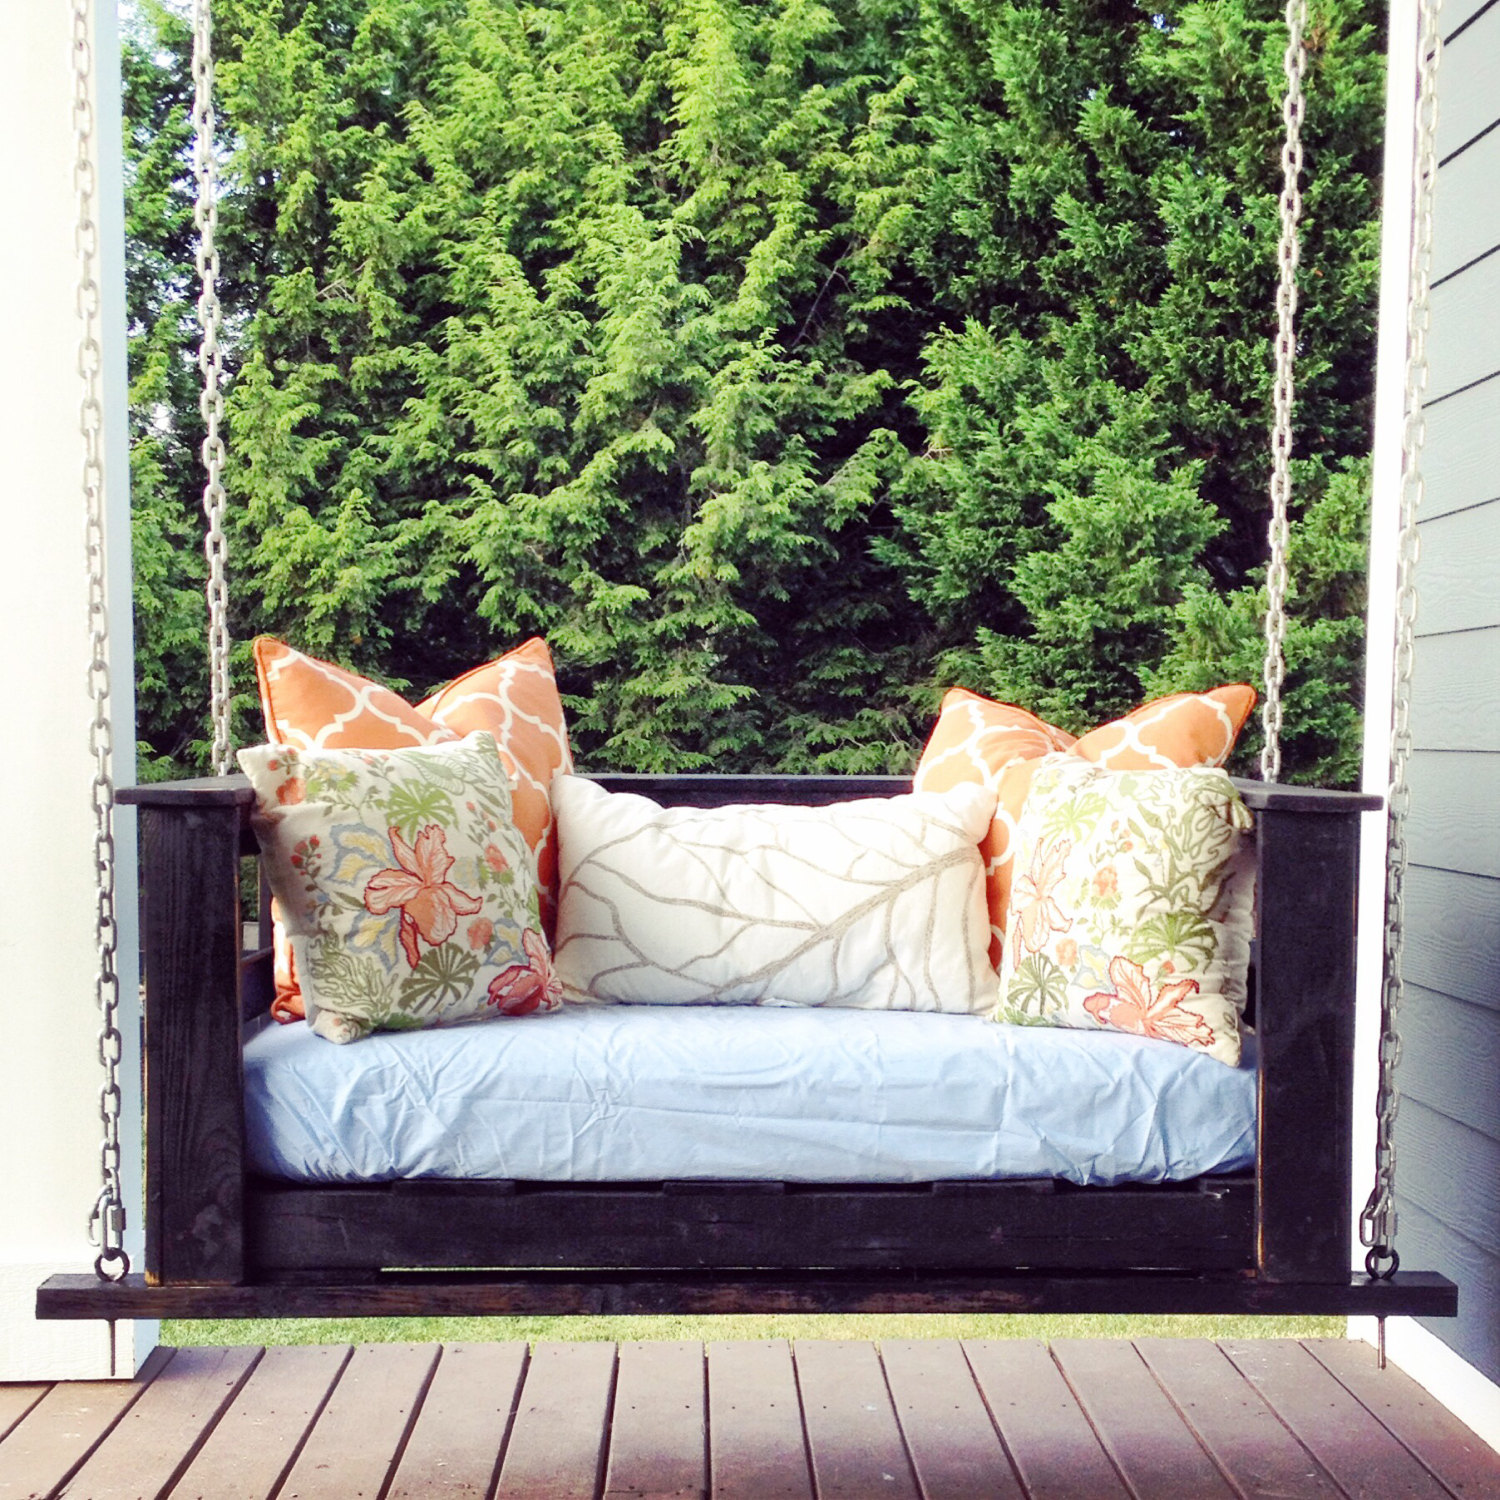 Unique-and-snuggly-porch-swing-made-from-rustic-pallets